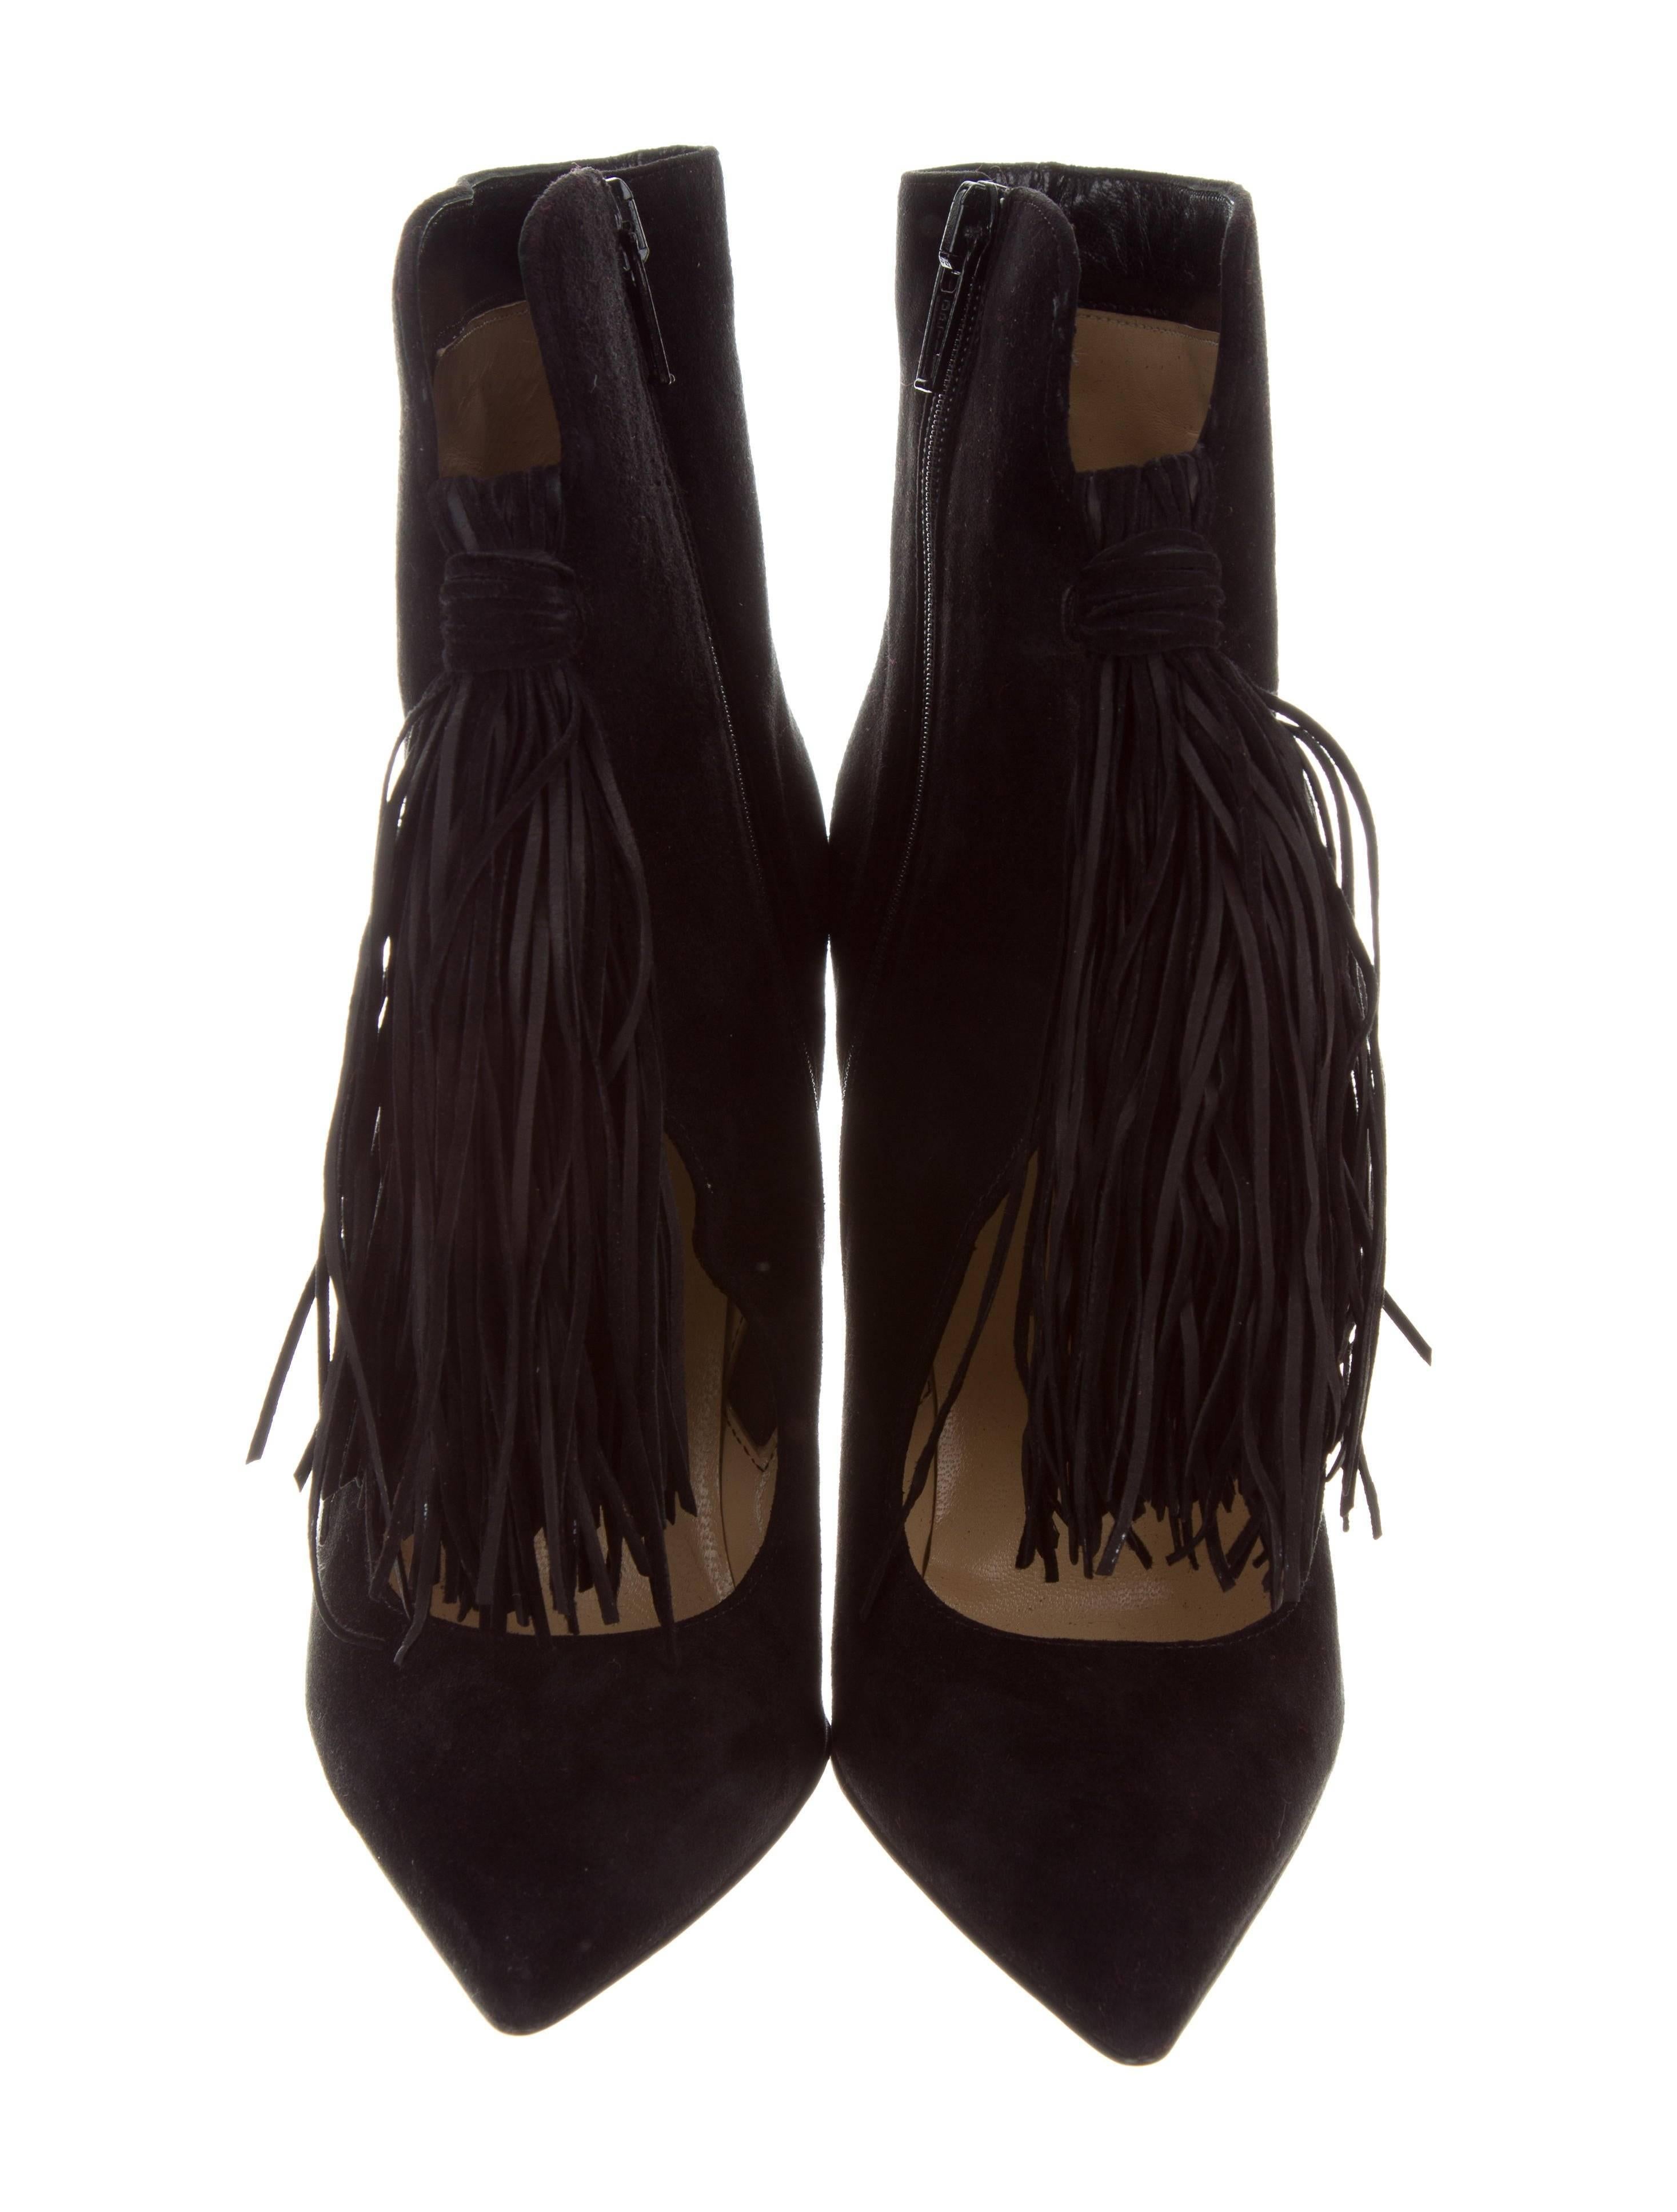 Christian Louboutin New Black Suede Fringe Evening Ankle Booties Boots in Box In New Condition In Chicago, IL